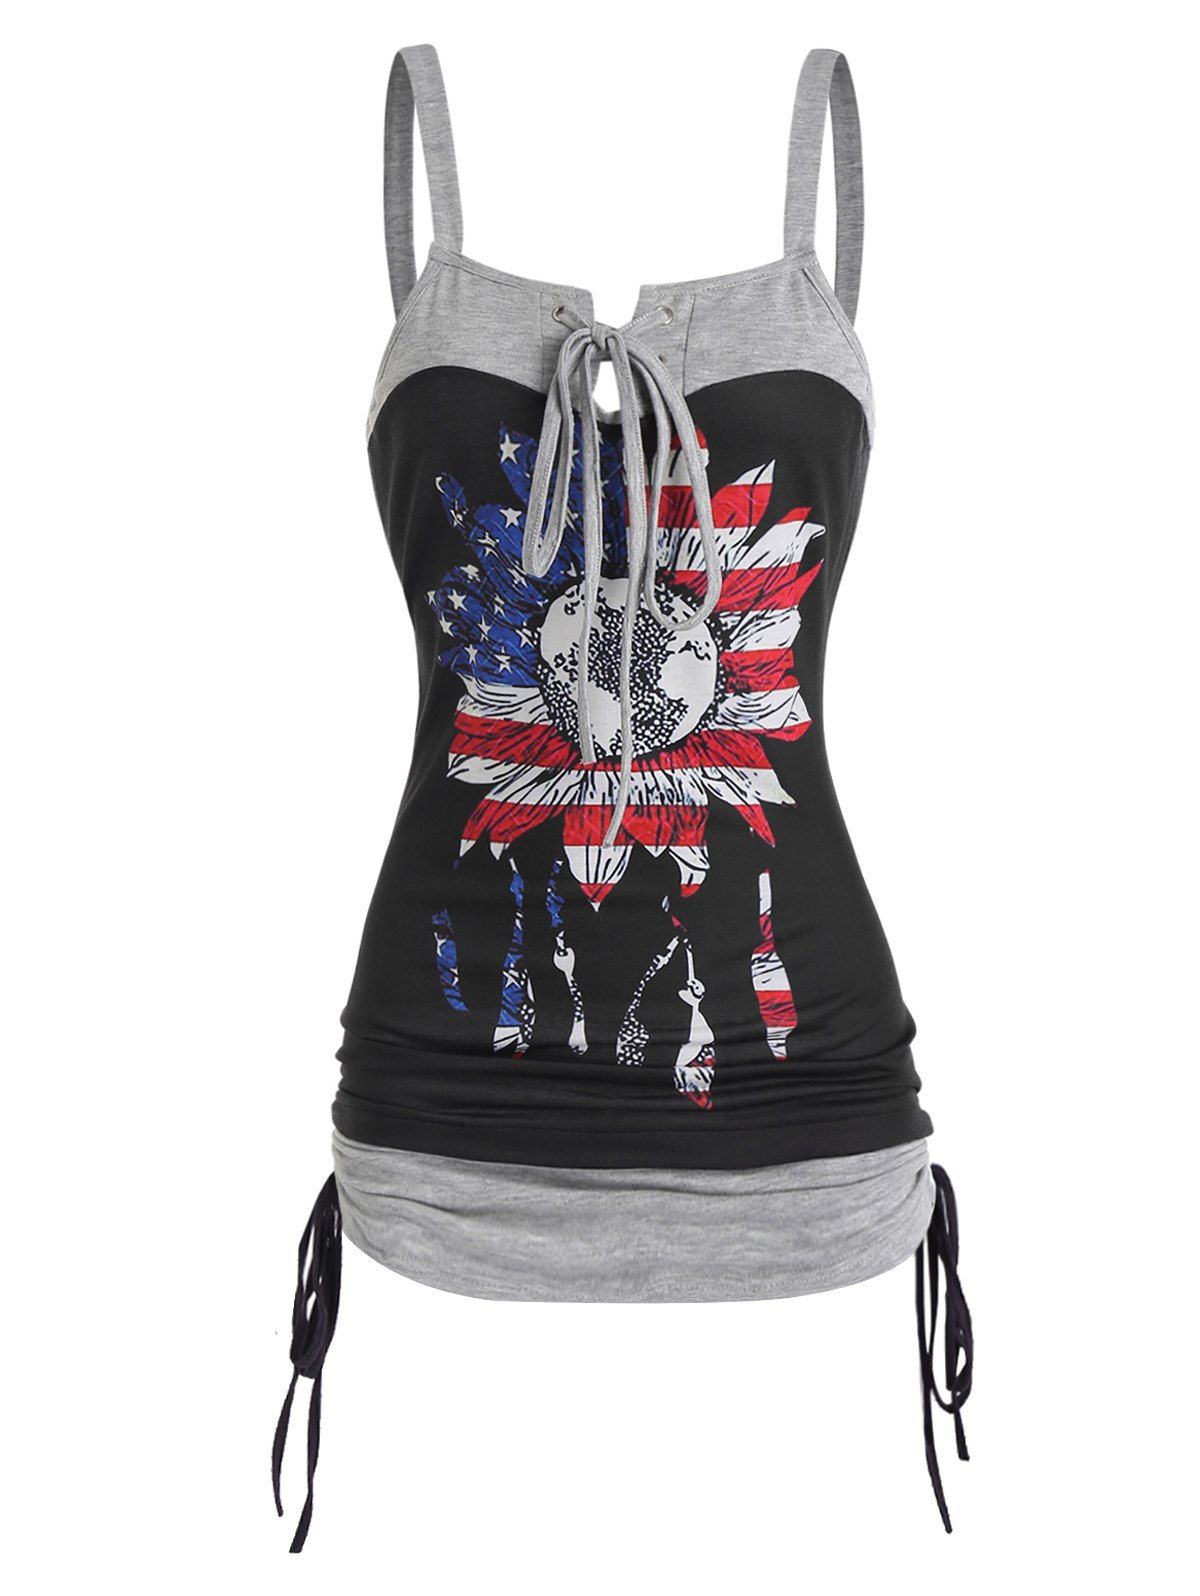 Floral Print Casual Tank Top Contrast Colorblock Lace Up Cinched American Flag Summer Top - BLACK L